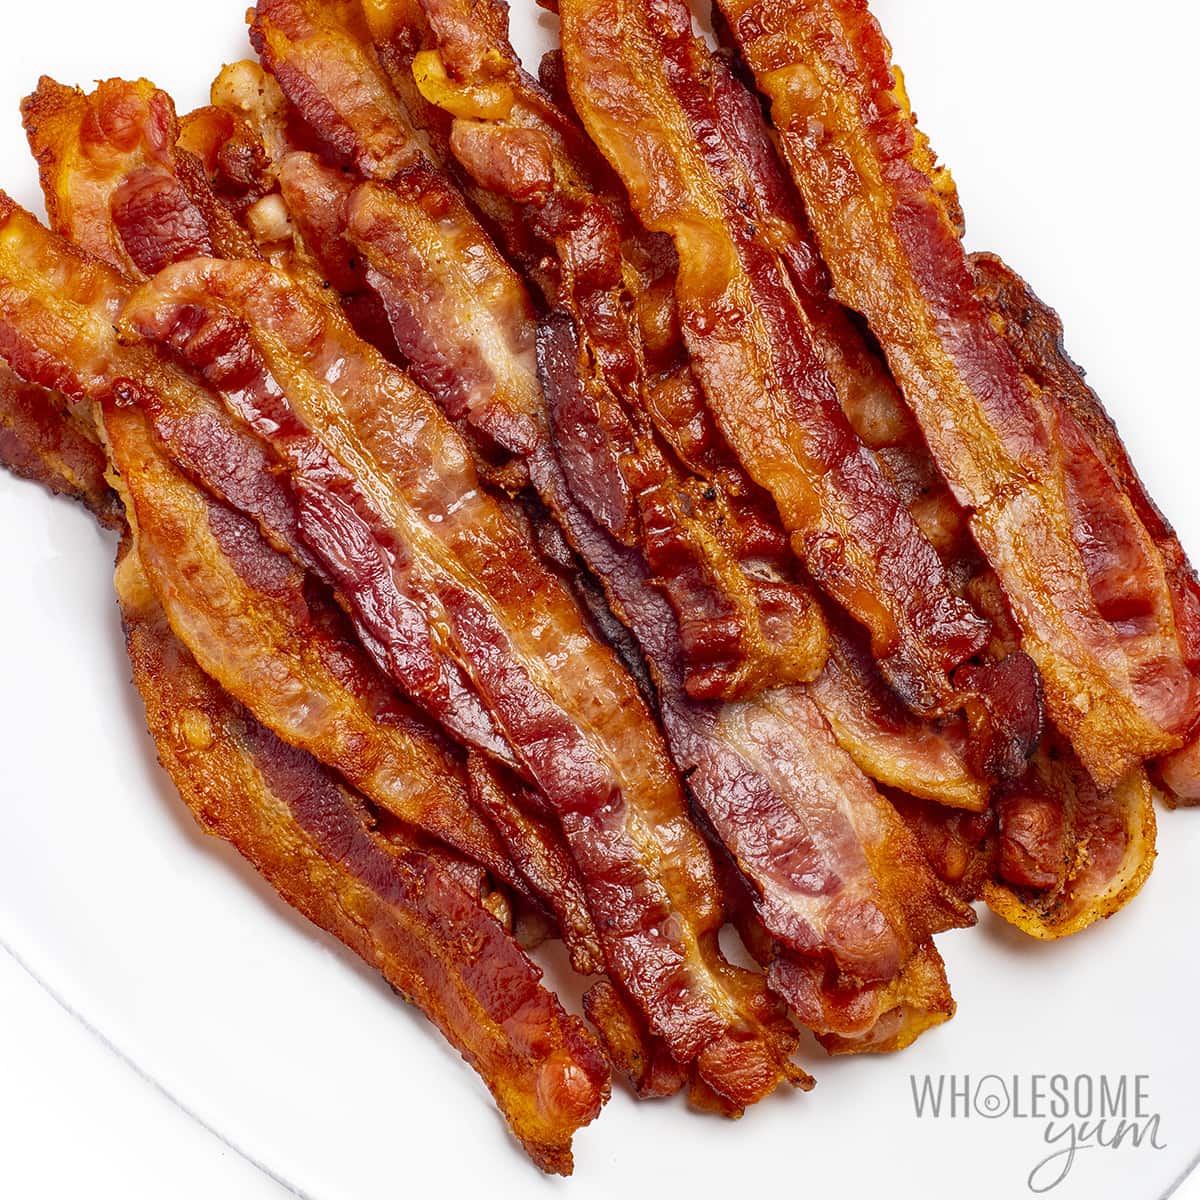 Pile of keto friendly bacon on a platter